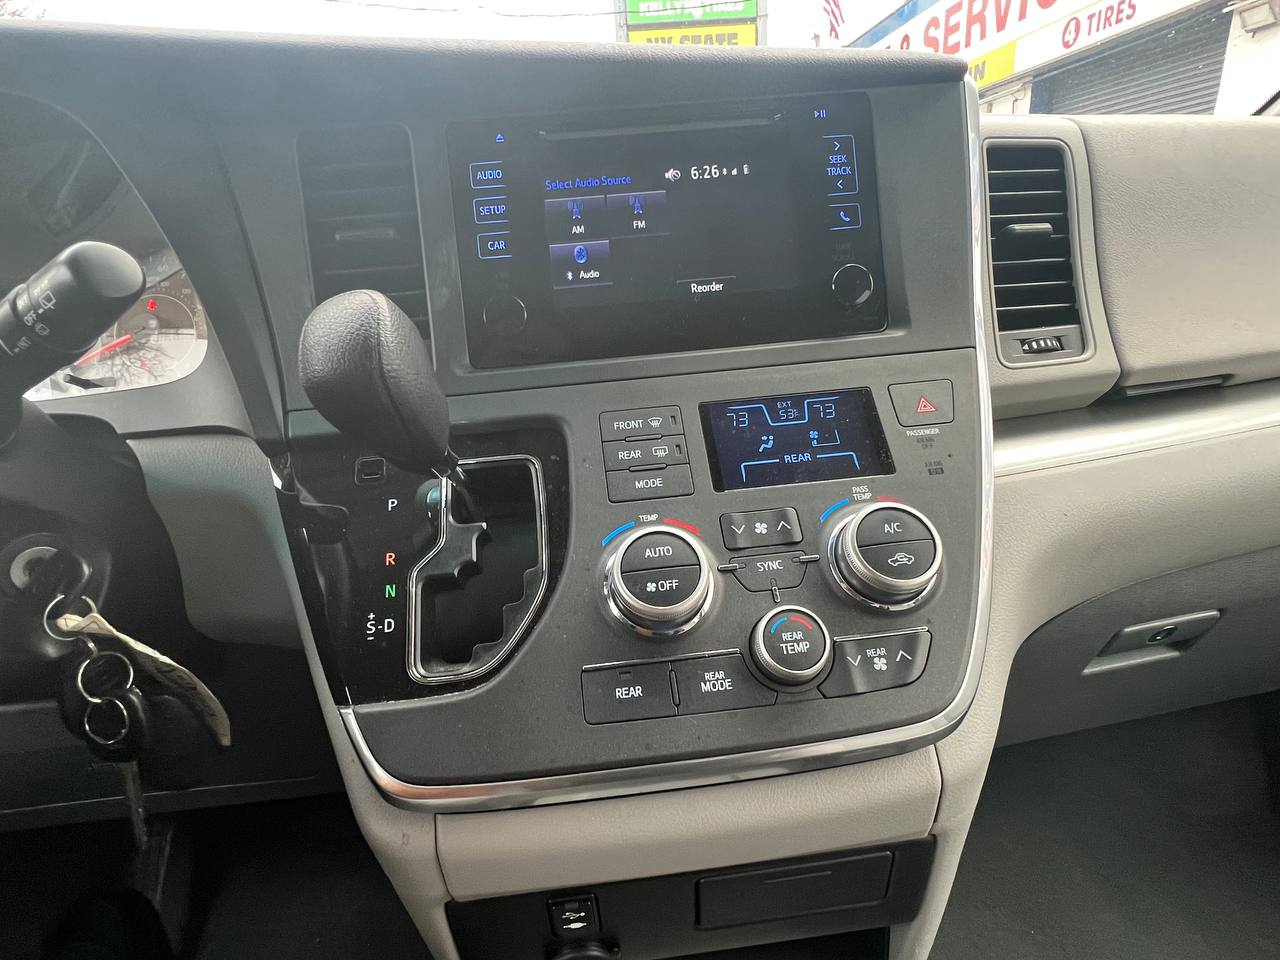 Used - Toyota Sienna L MINI VAN for sale in Staten Island NY